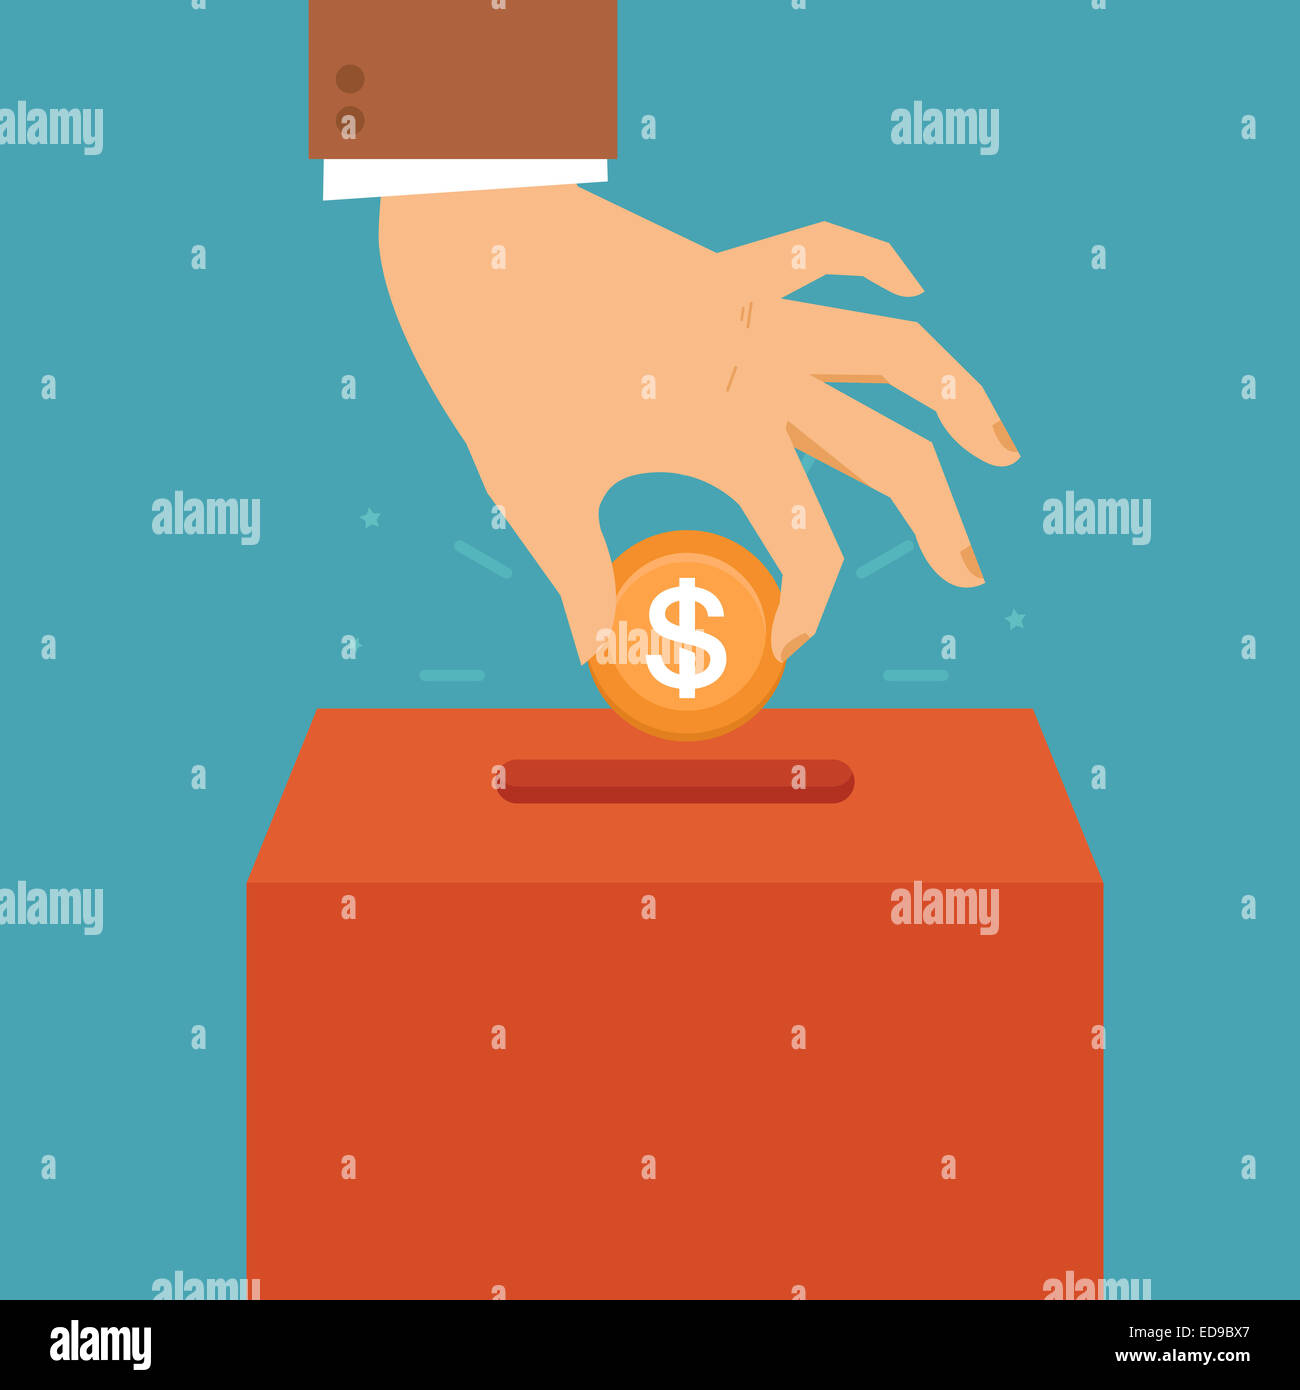 Donation concept in flat style - hand putting coin in the box for charity organization Stock Photo